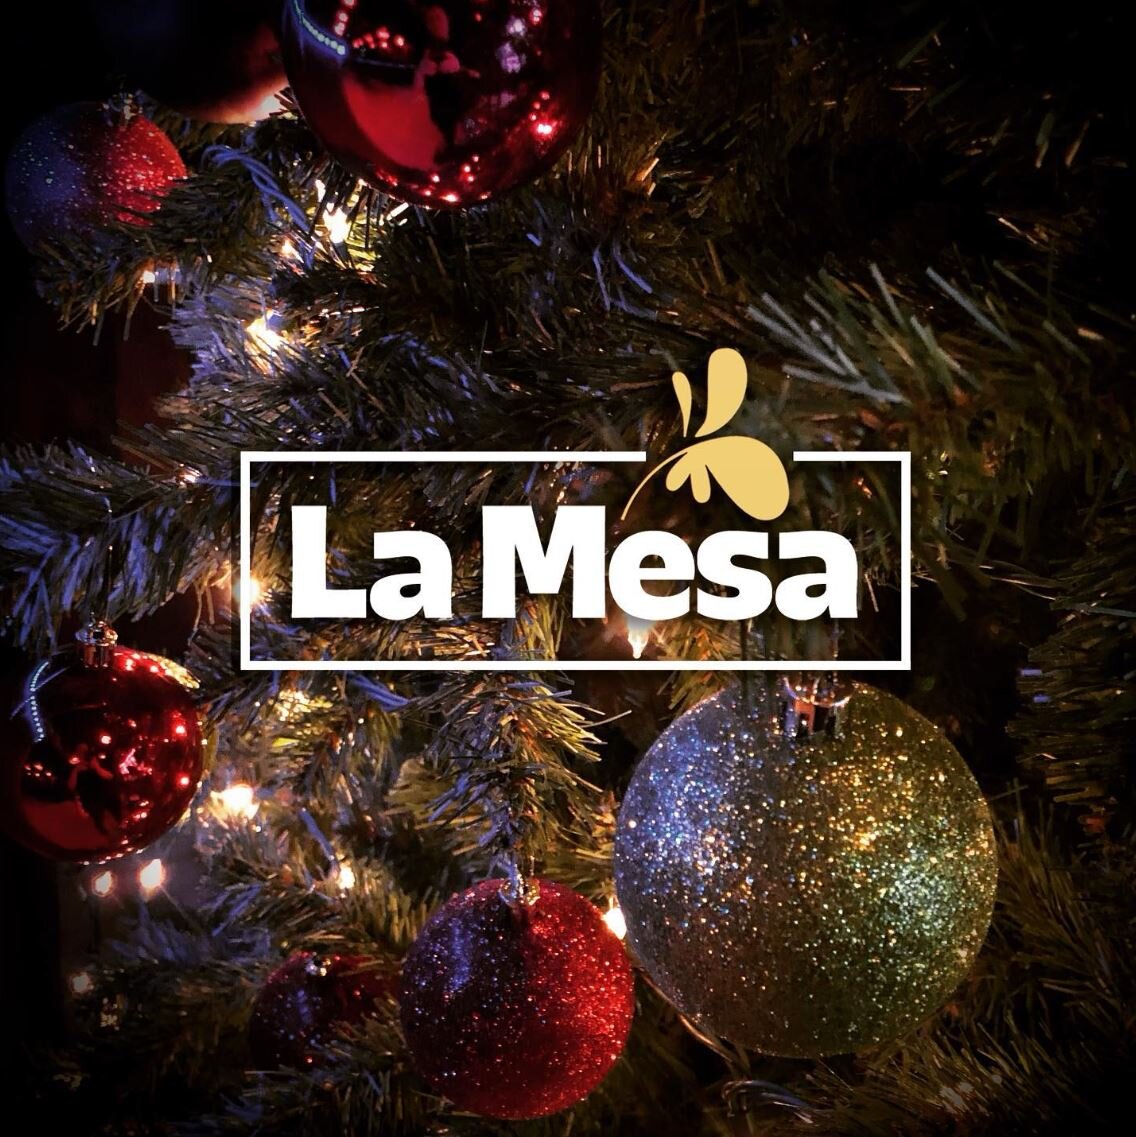 It's a festive time of year at La Mesa!  Gathering around a table with friends to enjoy delicious food and great cocktails gives us a moment to pause and be thankful for wonderful friends and neighbors.  Here's to a winter filled with time spent toge